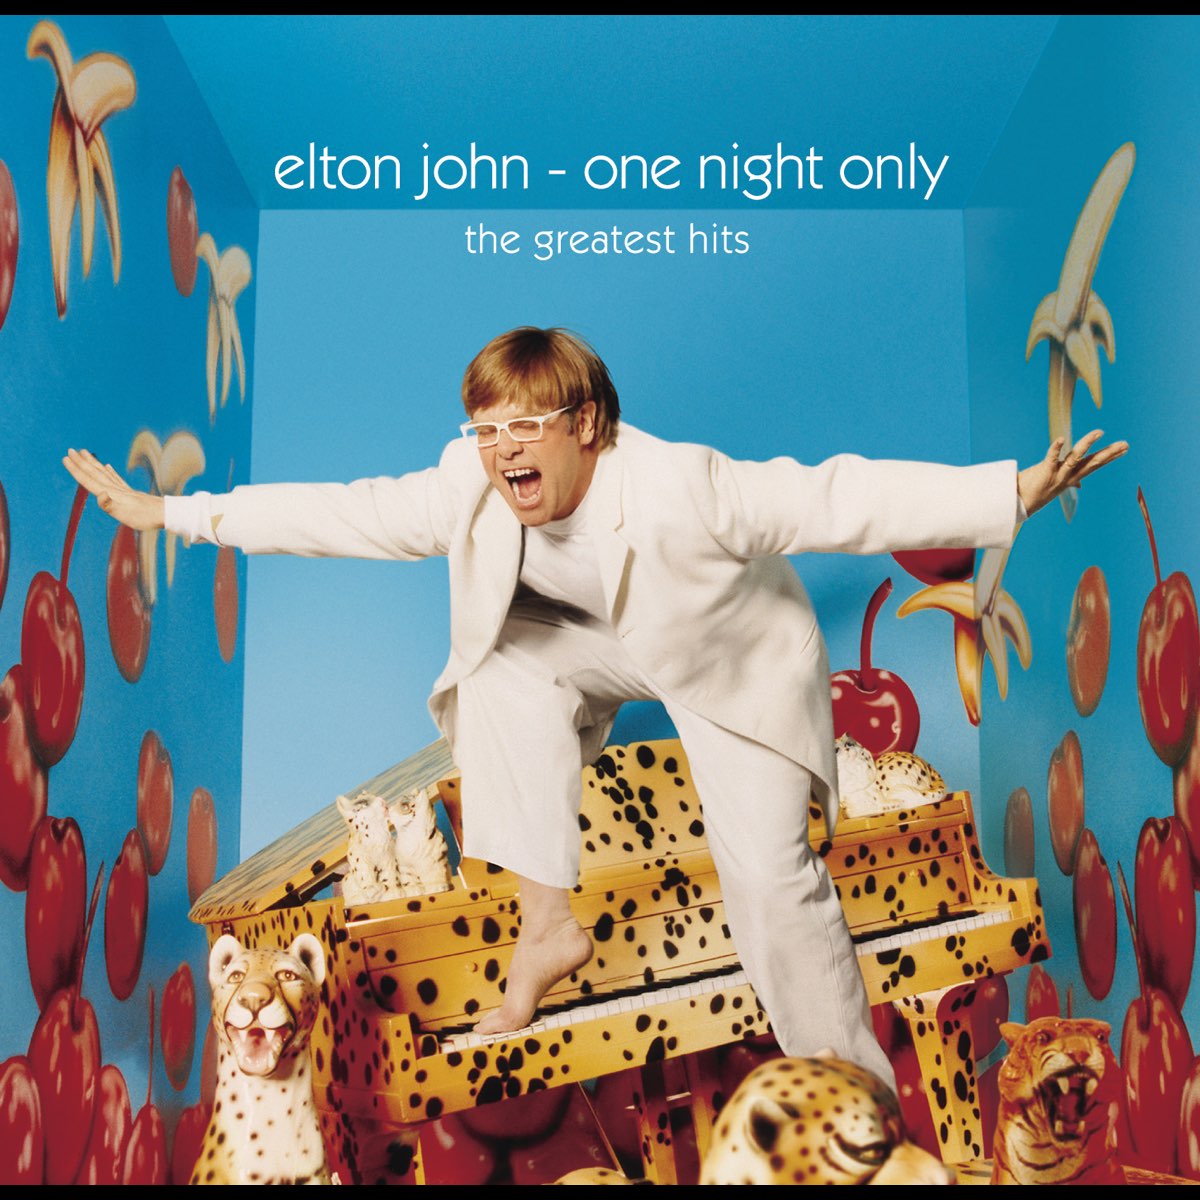 One Night Only: The Greatest Hits (Live) by Elton John on Apple Music